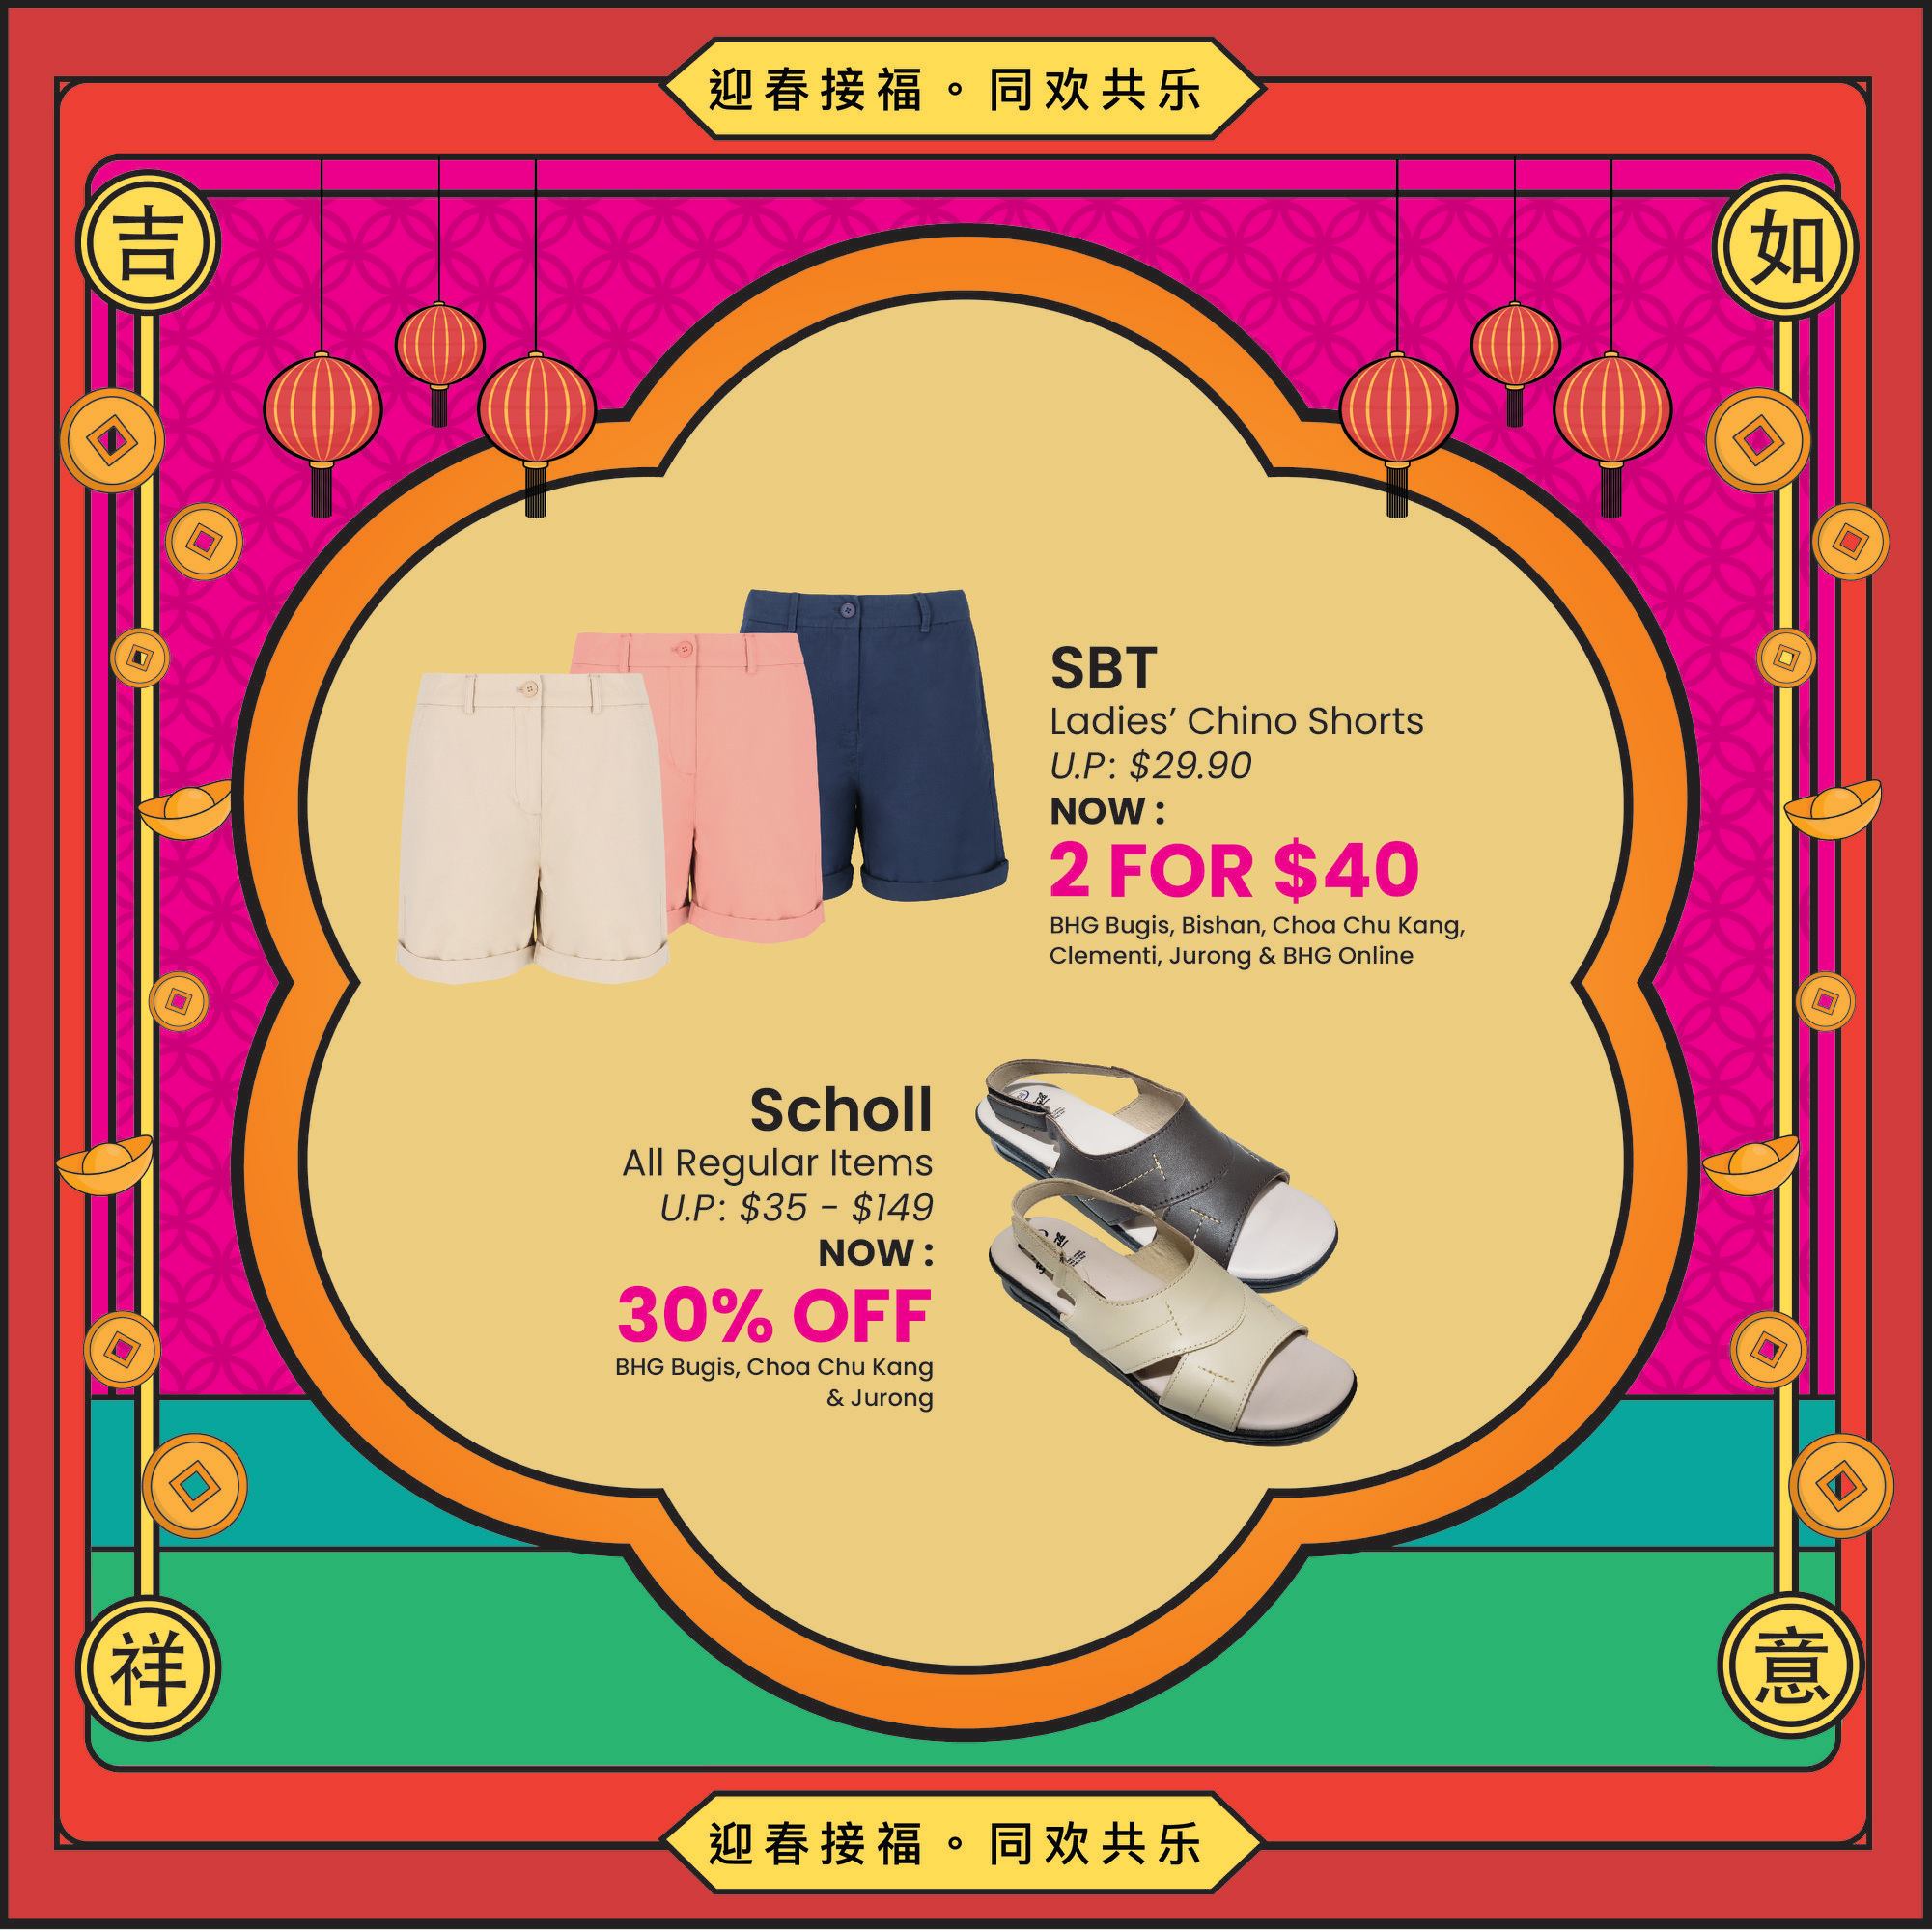 CFD 18-24 Feb 2021: BHG Weekly Promotion: Rejoicing Reunion Up to 70% OFF with POST CNY Sale